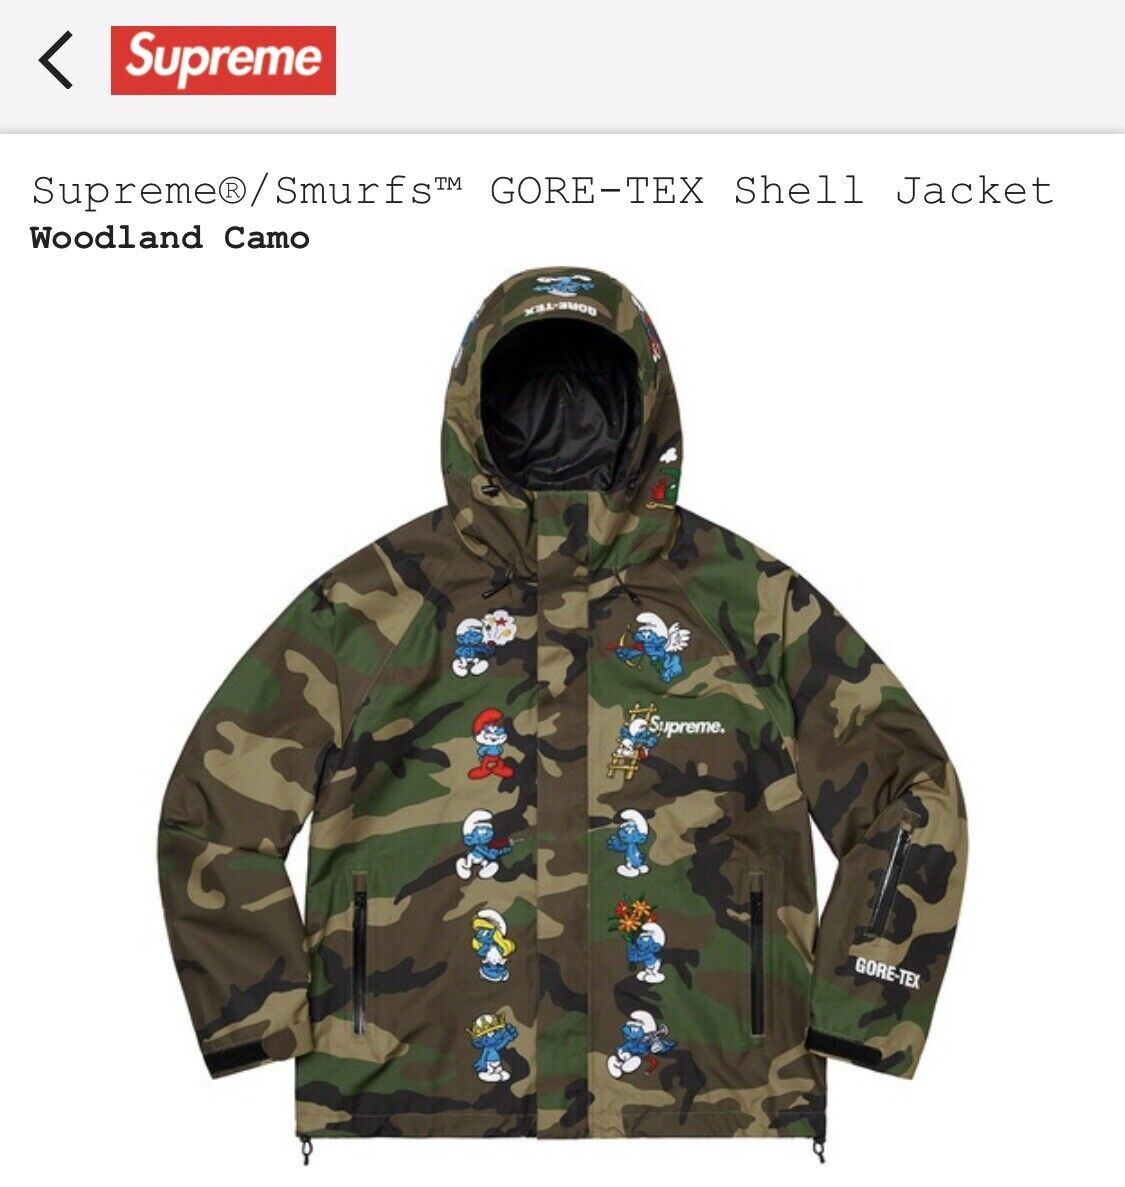 Supreme®/Smurfs™ GORE-TEX Shell Jacket SIZE M sold out